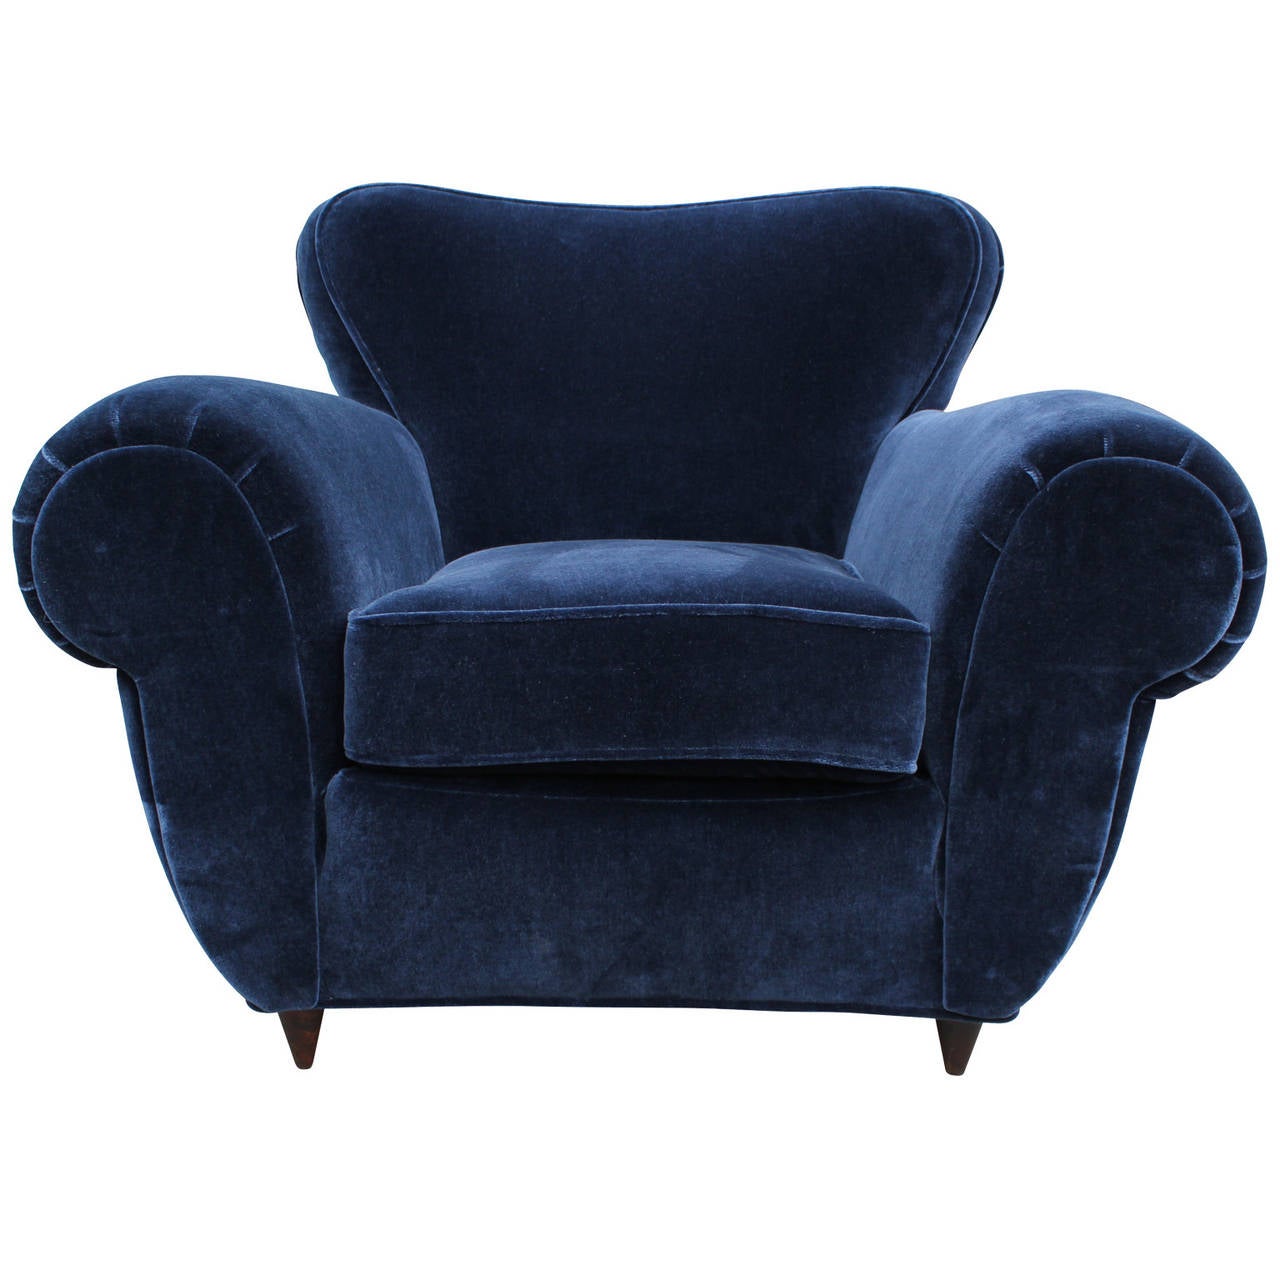 Large-scale pair of Italian lounge chairs attributed to Giulio Minoletti. Chairs are freshly upholstered in a luxe navy blue fine Dutch mohair velvet. Delicate burl wood legs underneath. Very comfortable stunning chairs.